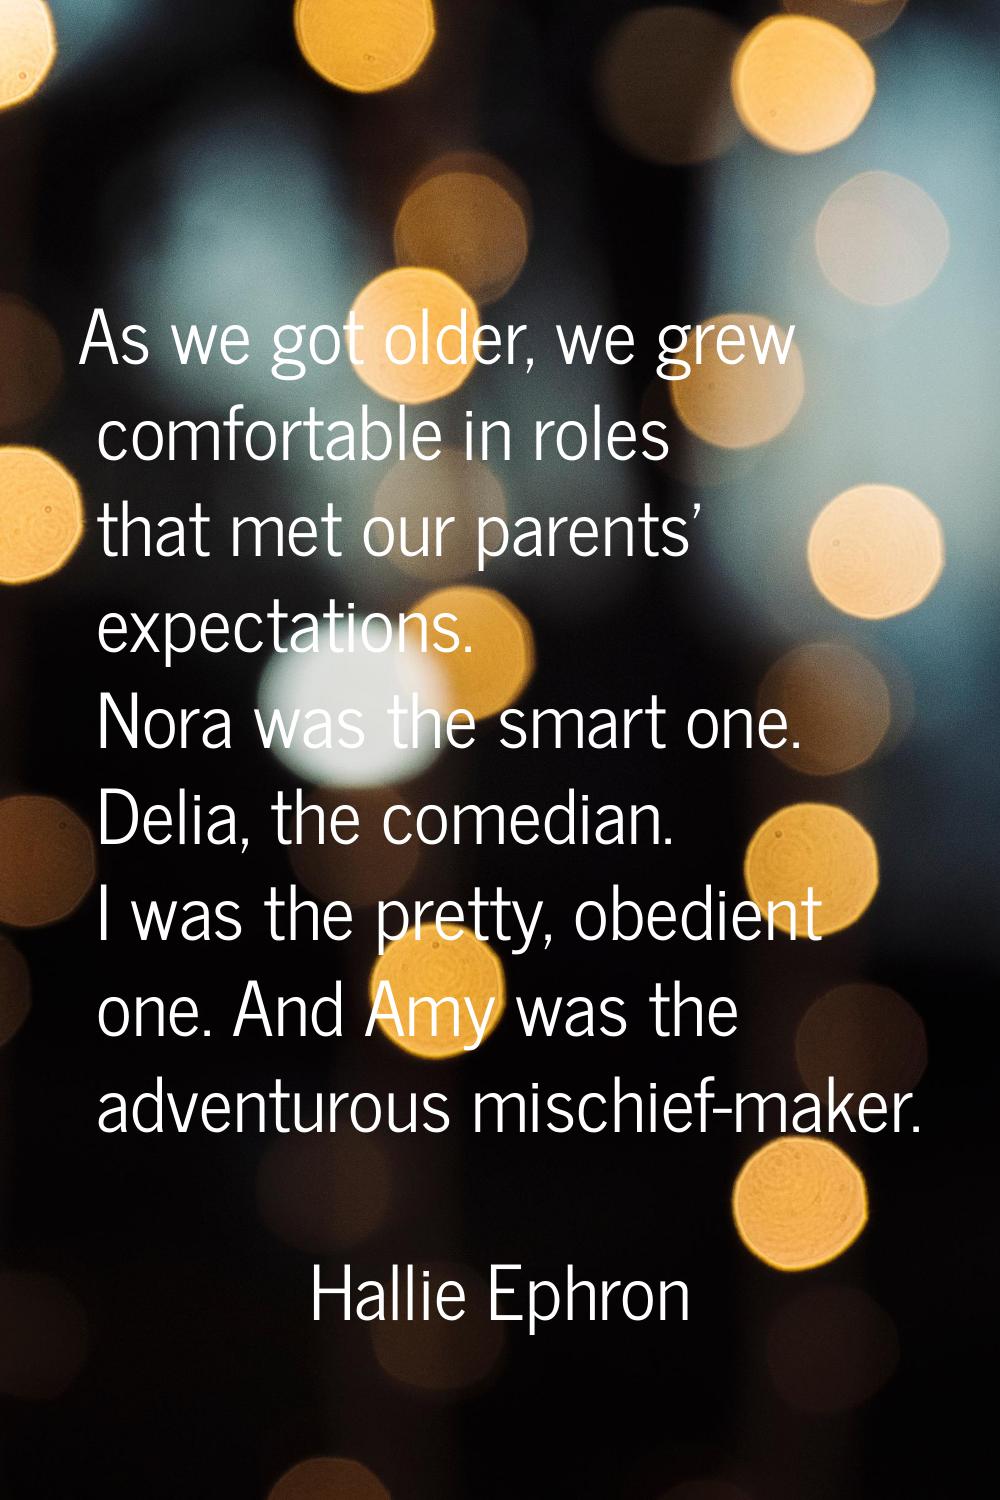 As we got older, we grew comfortable in roles that met our parents' expectations. Nora was the smar